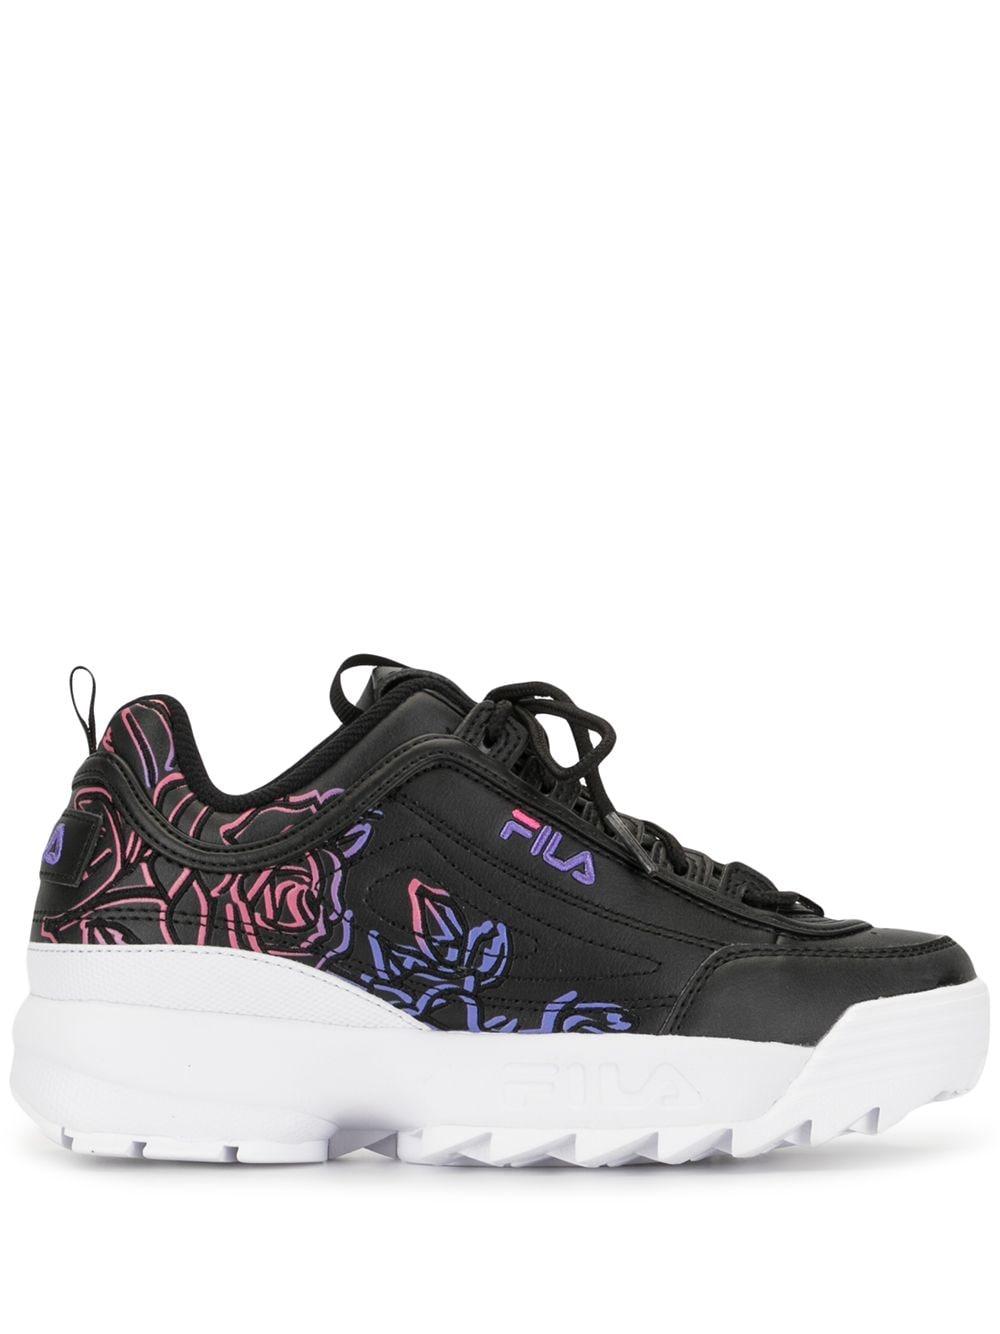 Fila Leather Disruptor Floral Sneakers in Black | Lyst